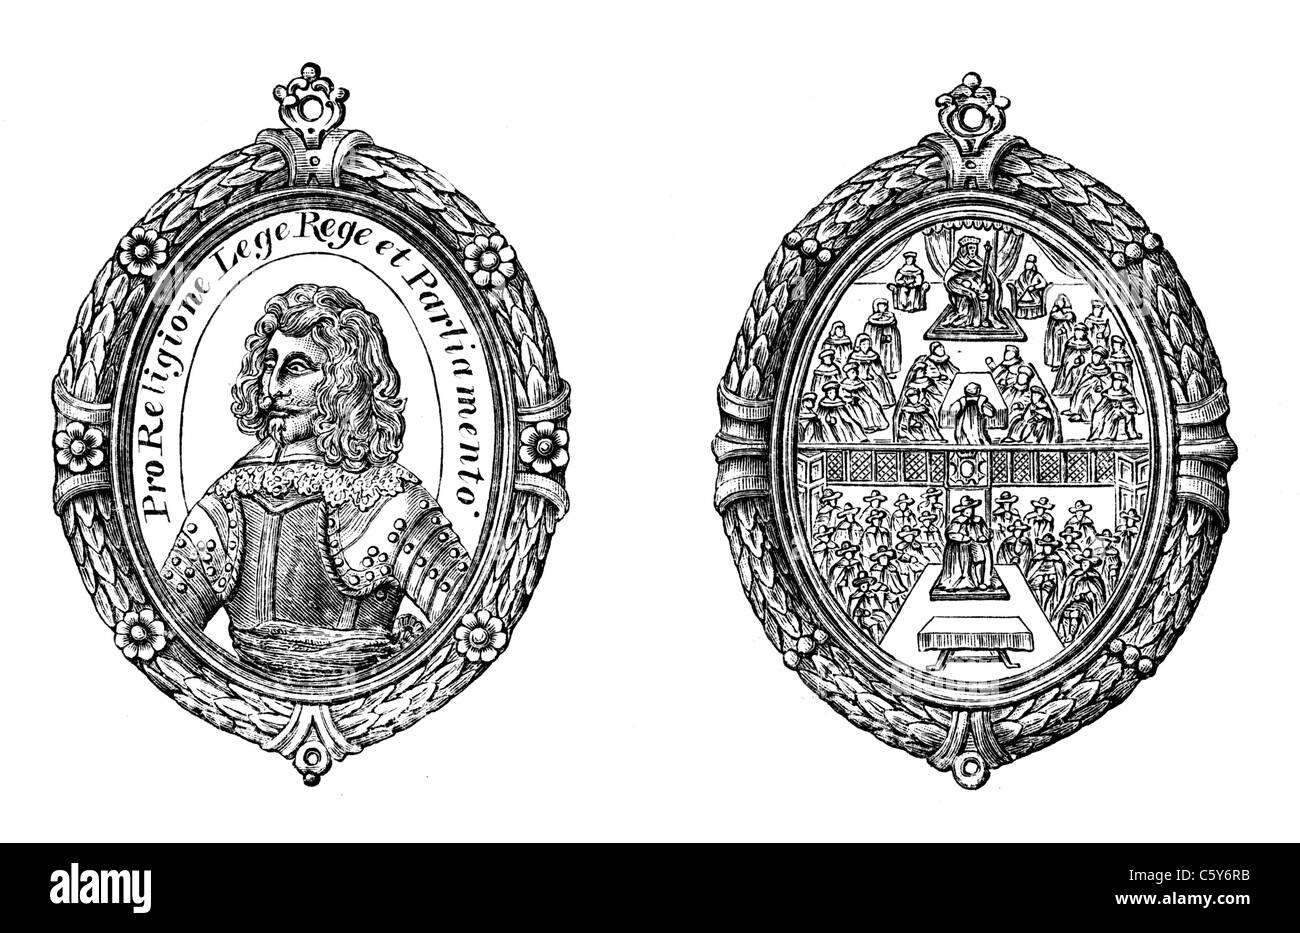 Medal of the Earl of Manchester, English Parliamentarian during the English Ciil war; Black and White Illustration; Stock Photo